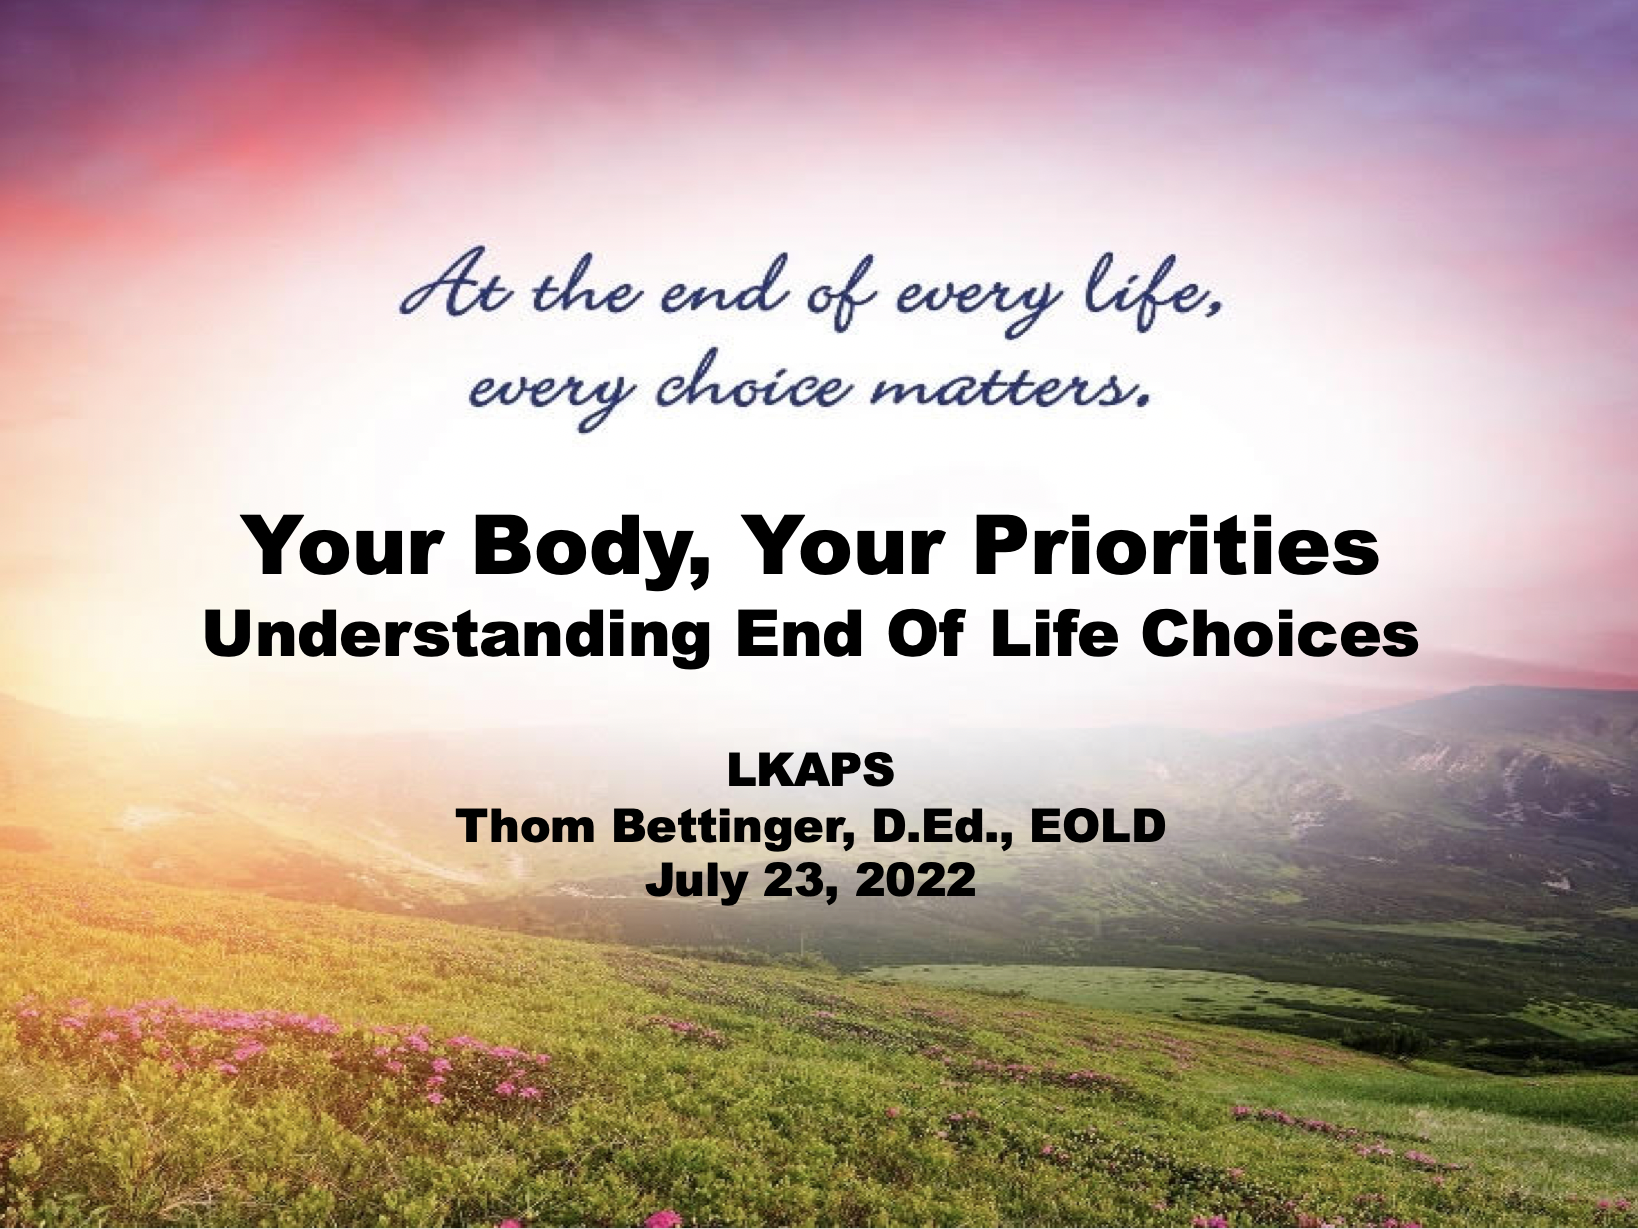 Your Life, Your Priorities…Understanding End of Life Choices